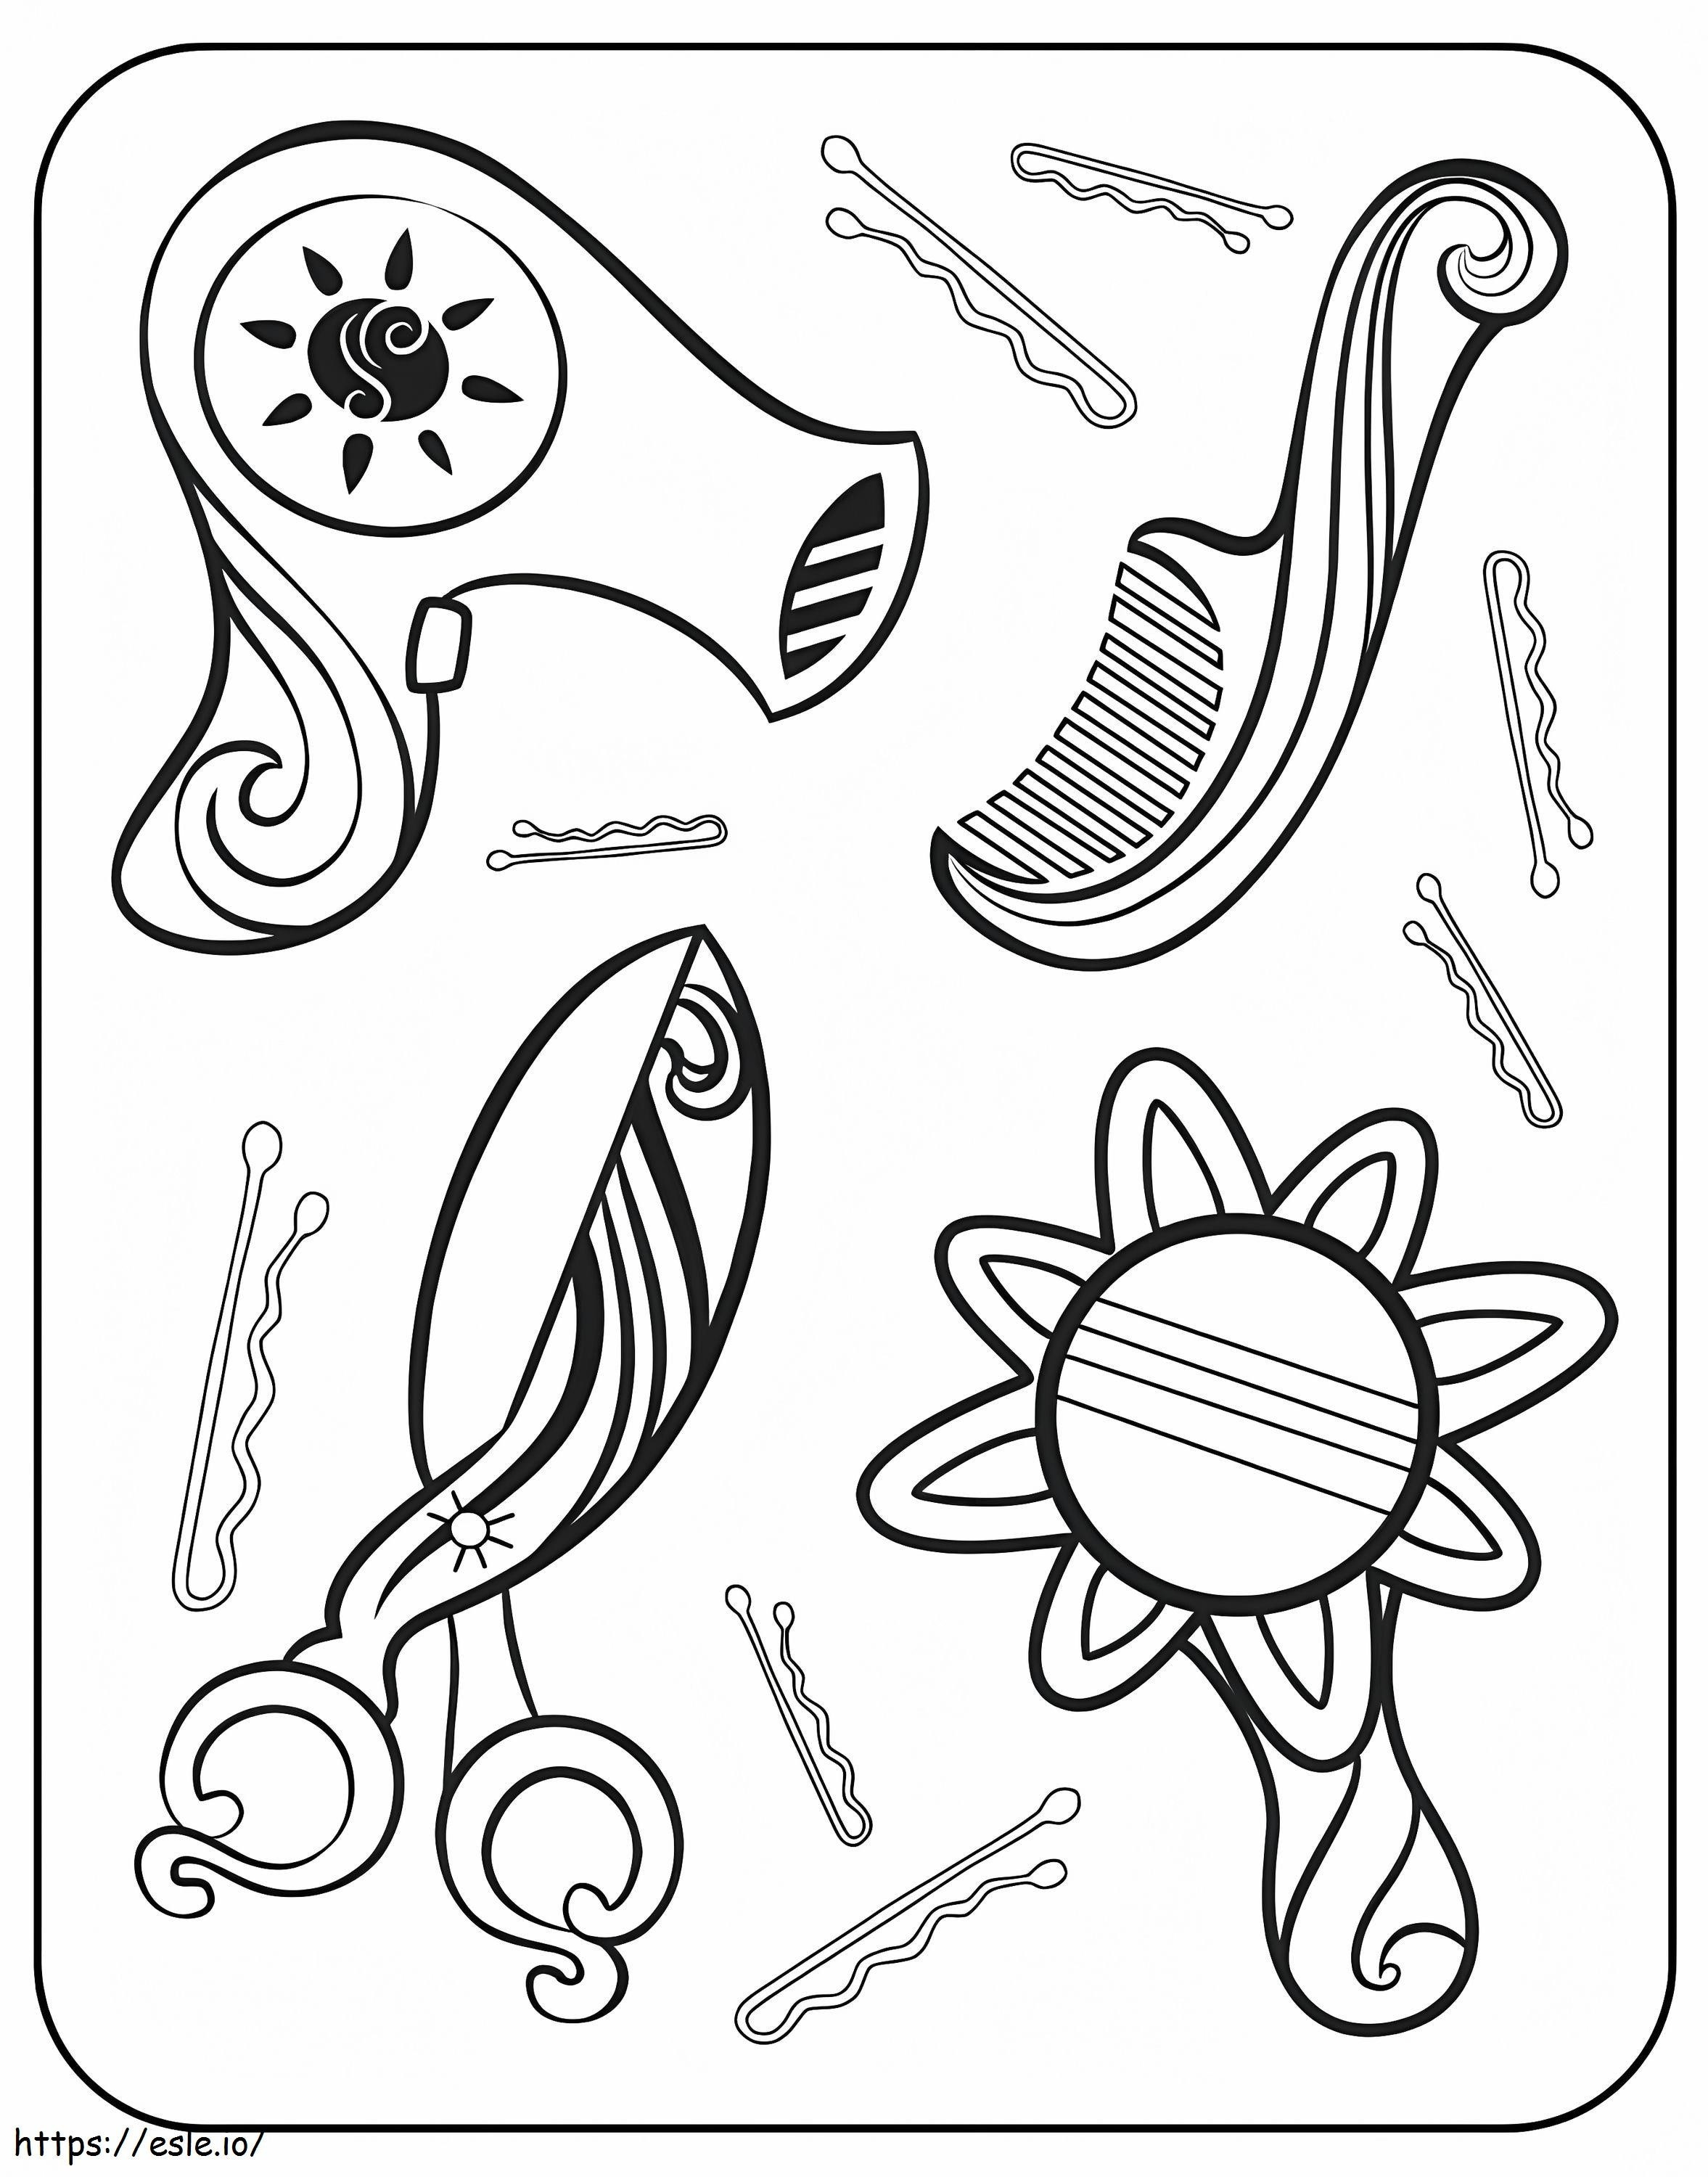 Sunny Day 1 coloring page